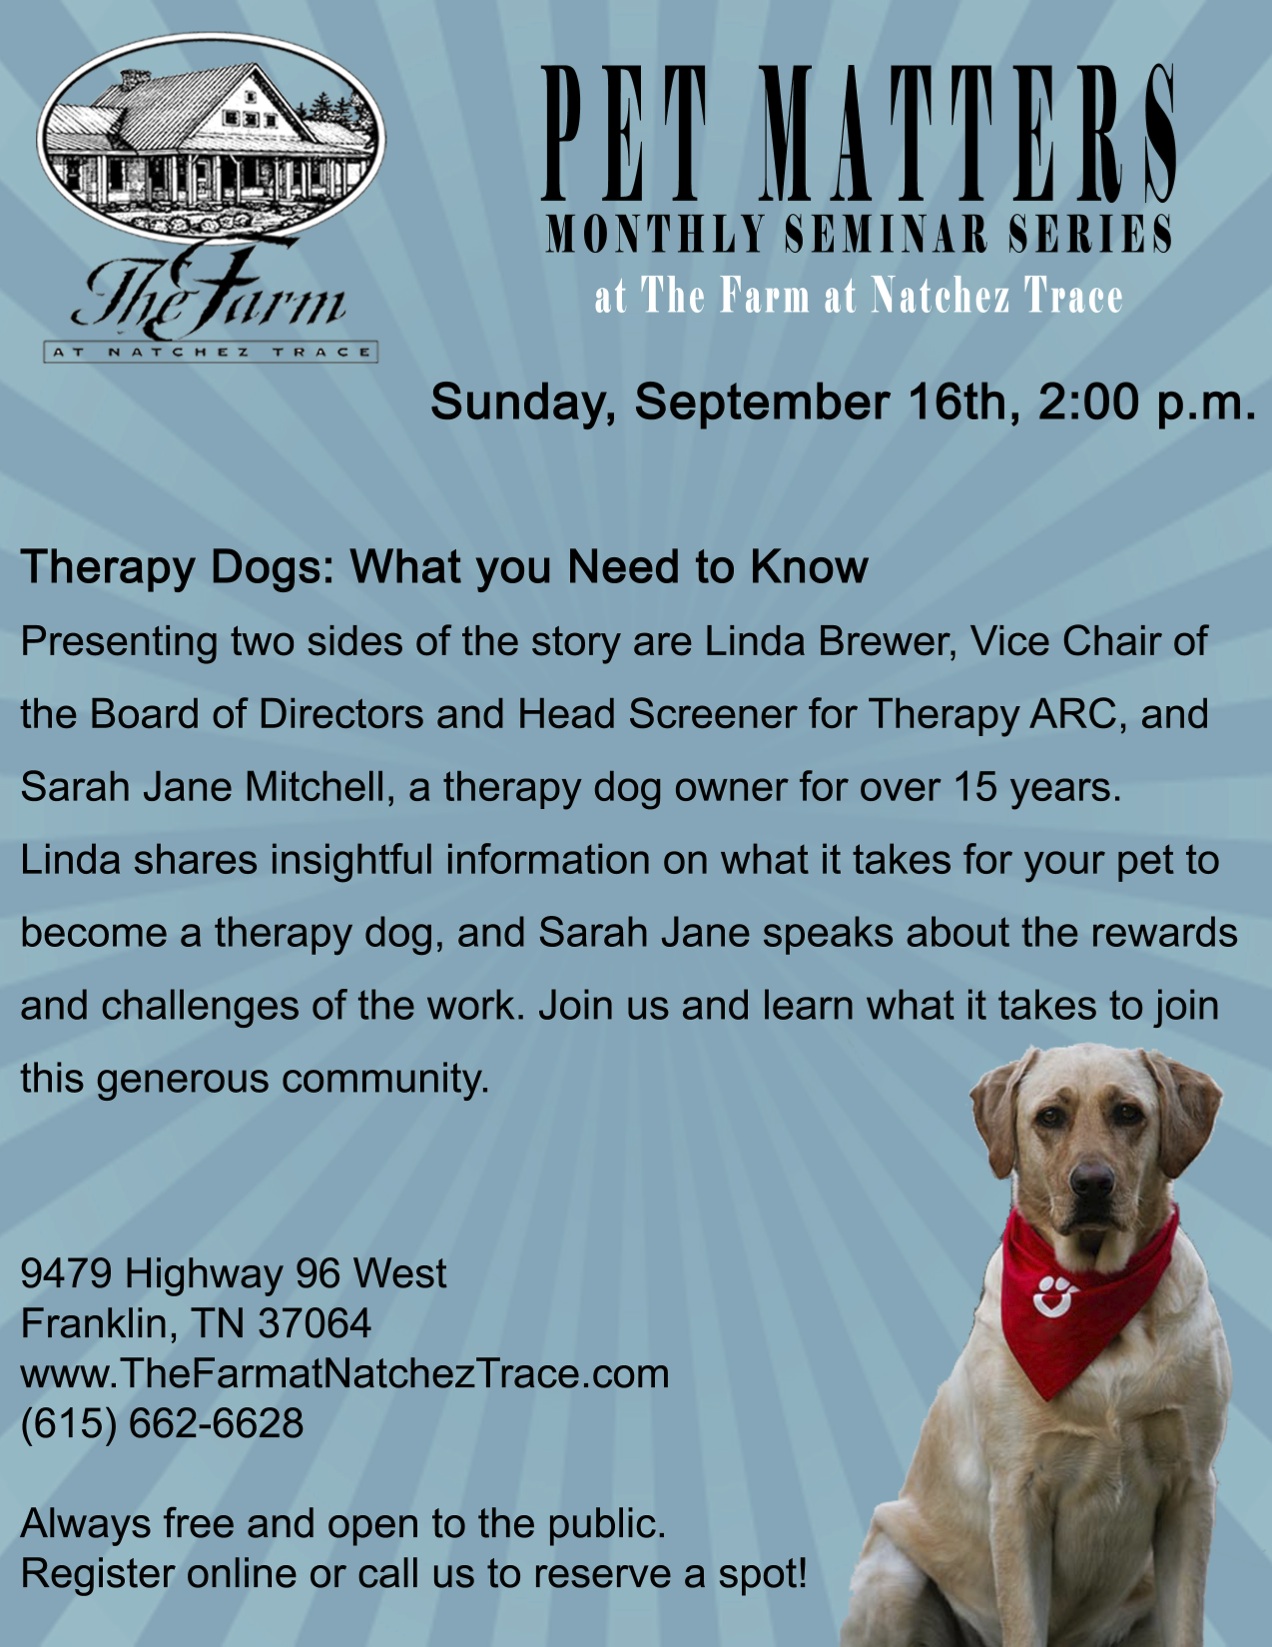 Dog Therapy: What You Need To Know - Pet Matters Seminar Series